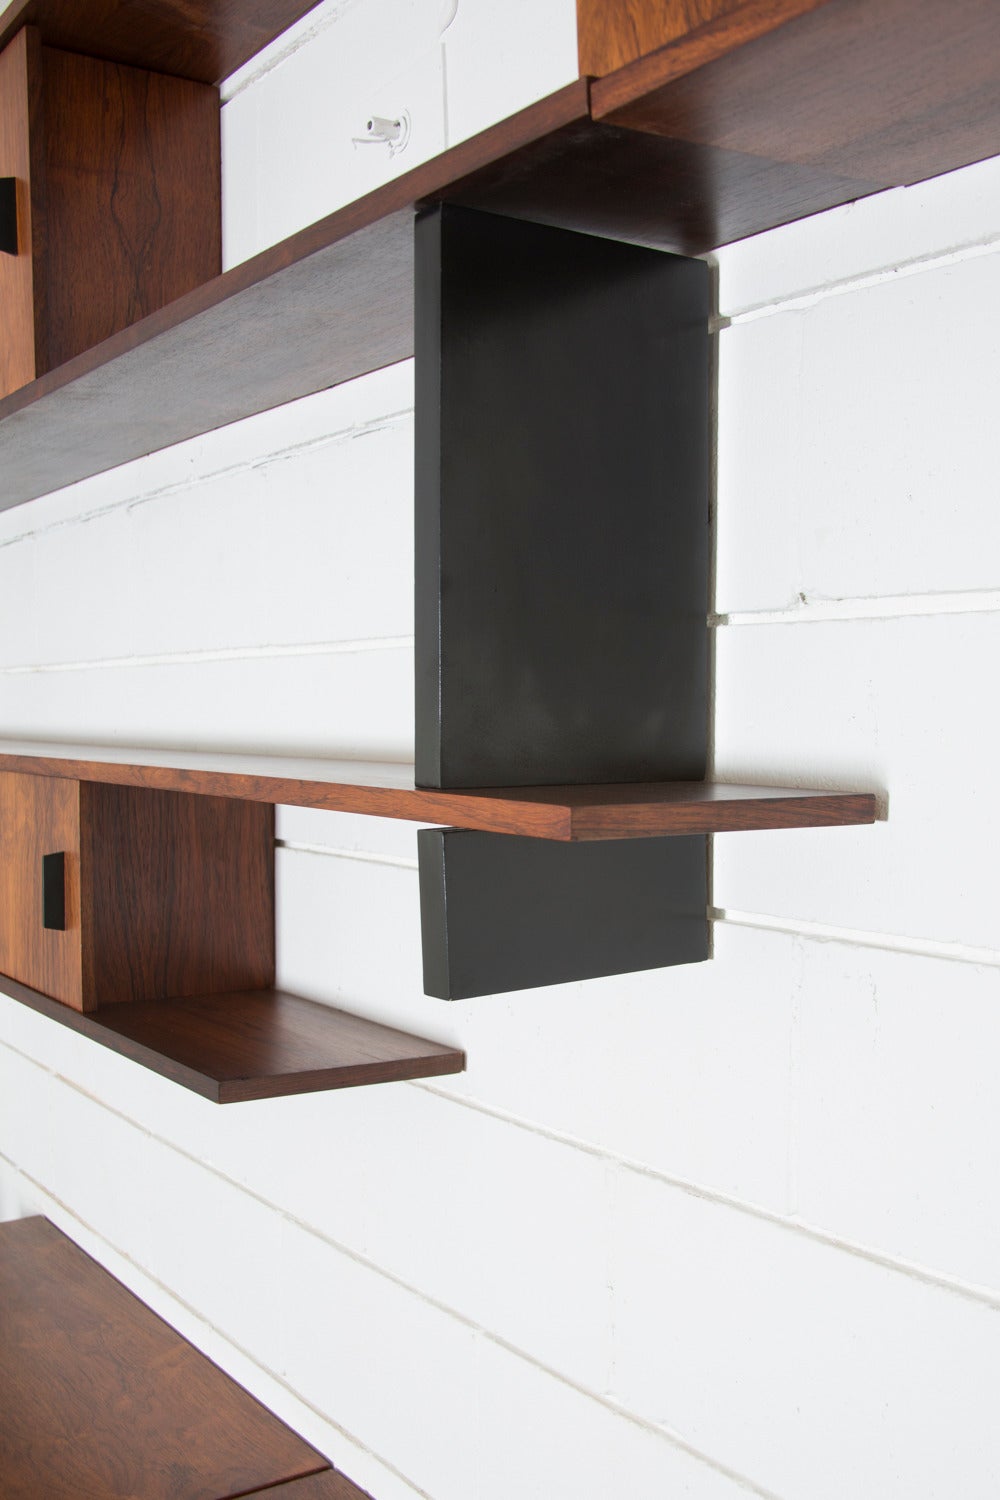 Massive floating rosewood wall system with beautiful bookmatched cabinet fronts and black enameled metal pulls on upper cabinets. Upper shelves and cabinets are 9'' Deep and lower cabinets are 17.5'' deep. Unit measured at 11'' from floor. In good